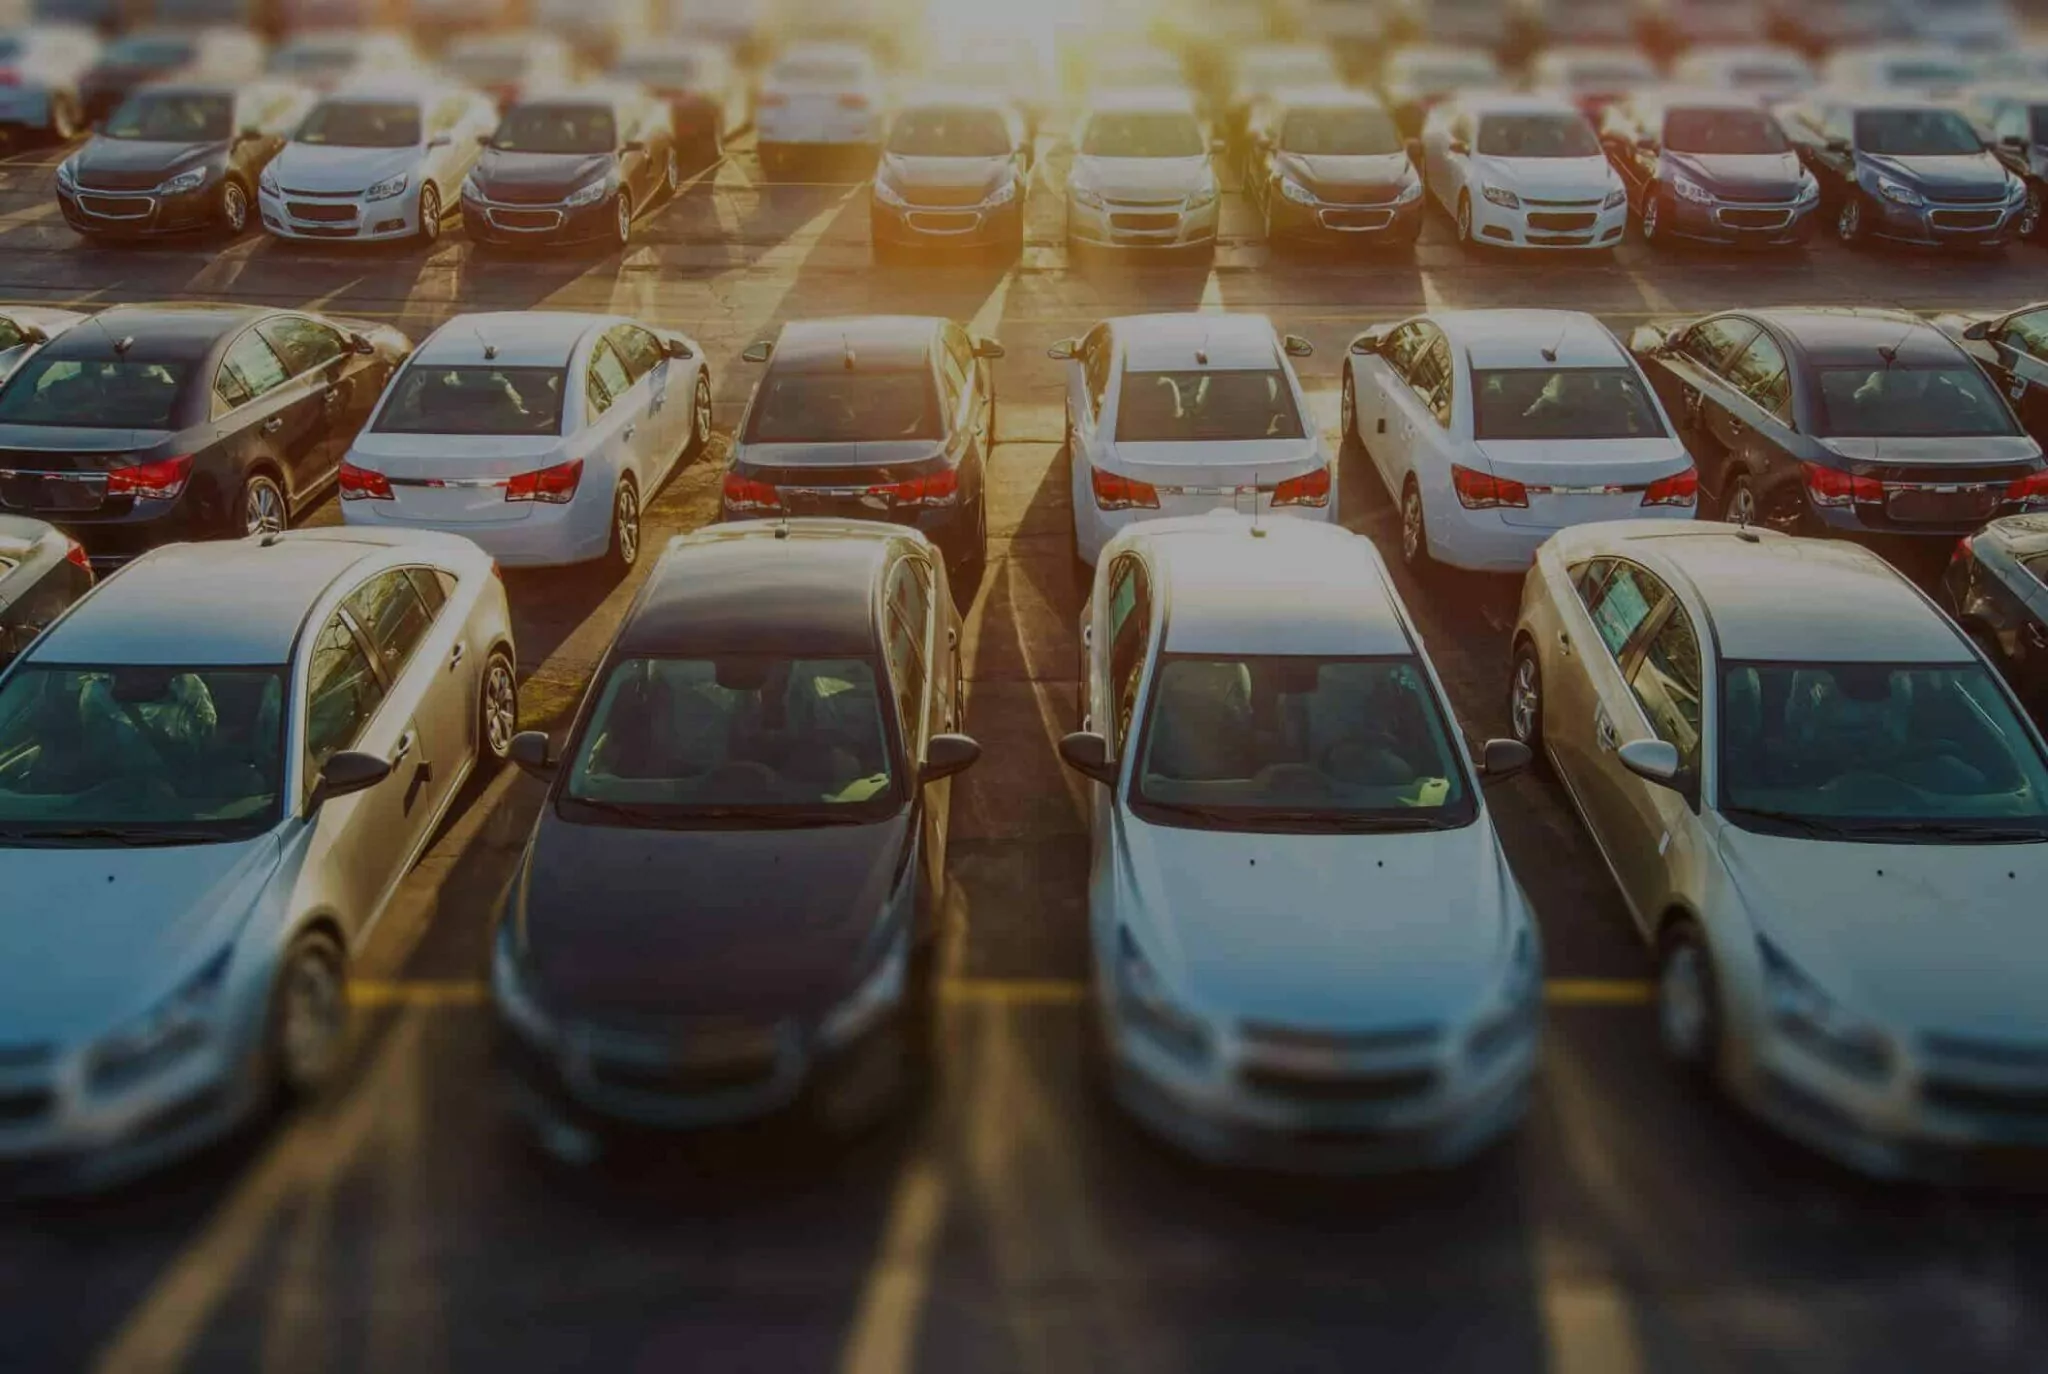 Overhead view of a fleet of vehicles in a large parking lot